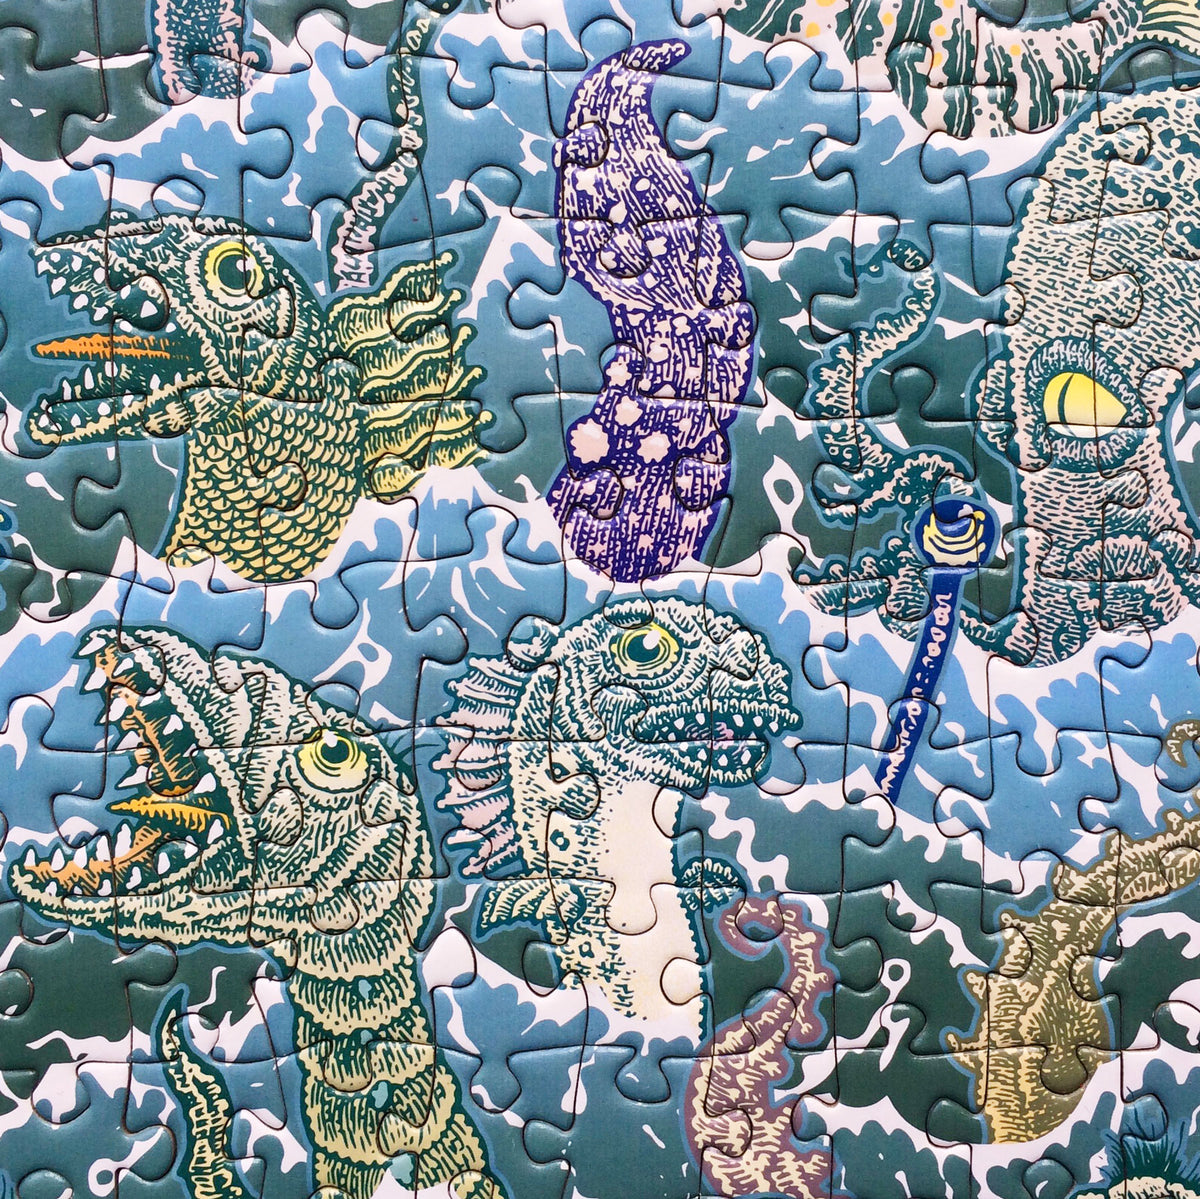 Ocean Commotion Jigsaw Puzzle